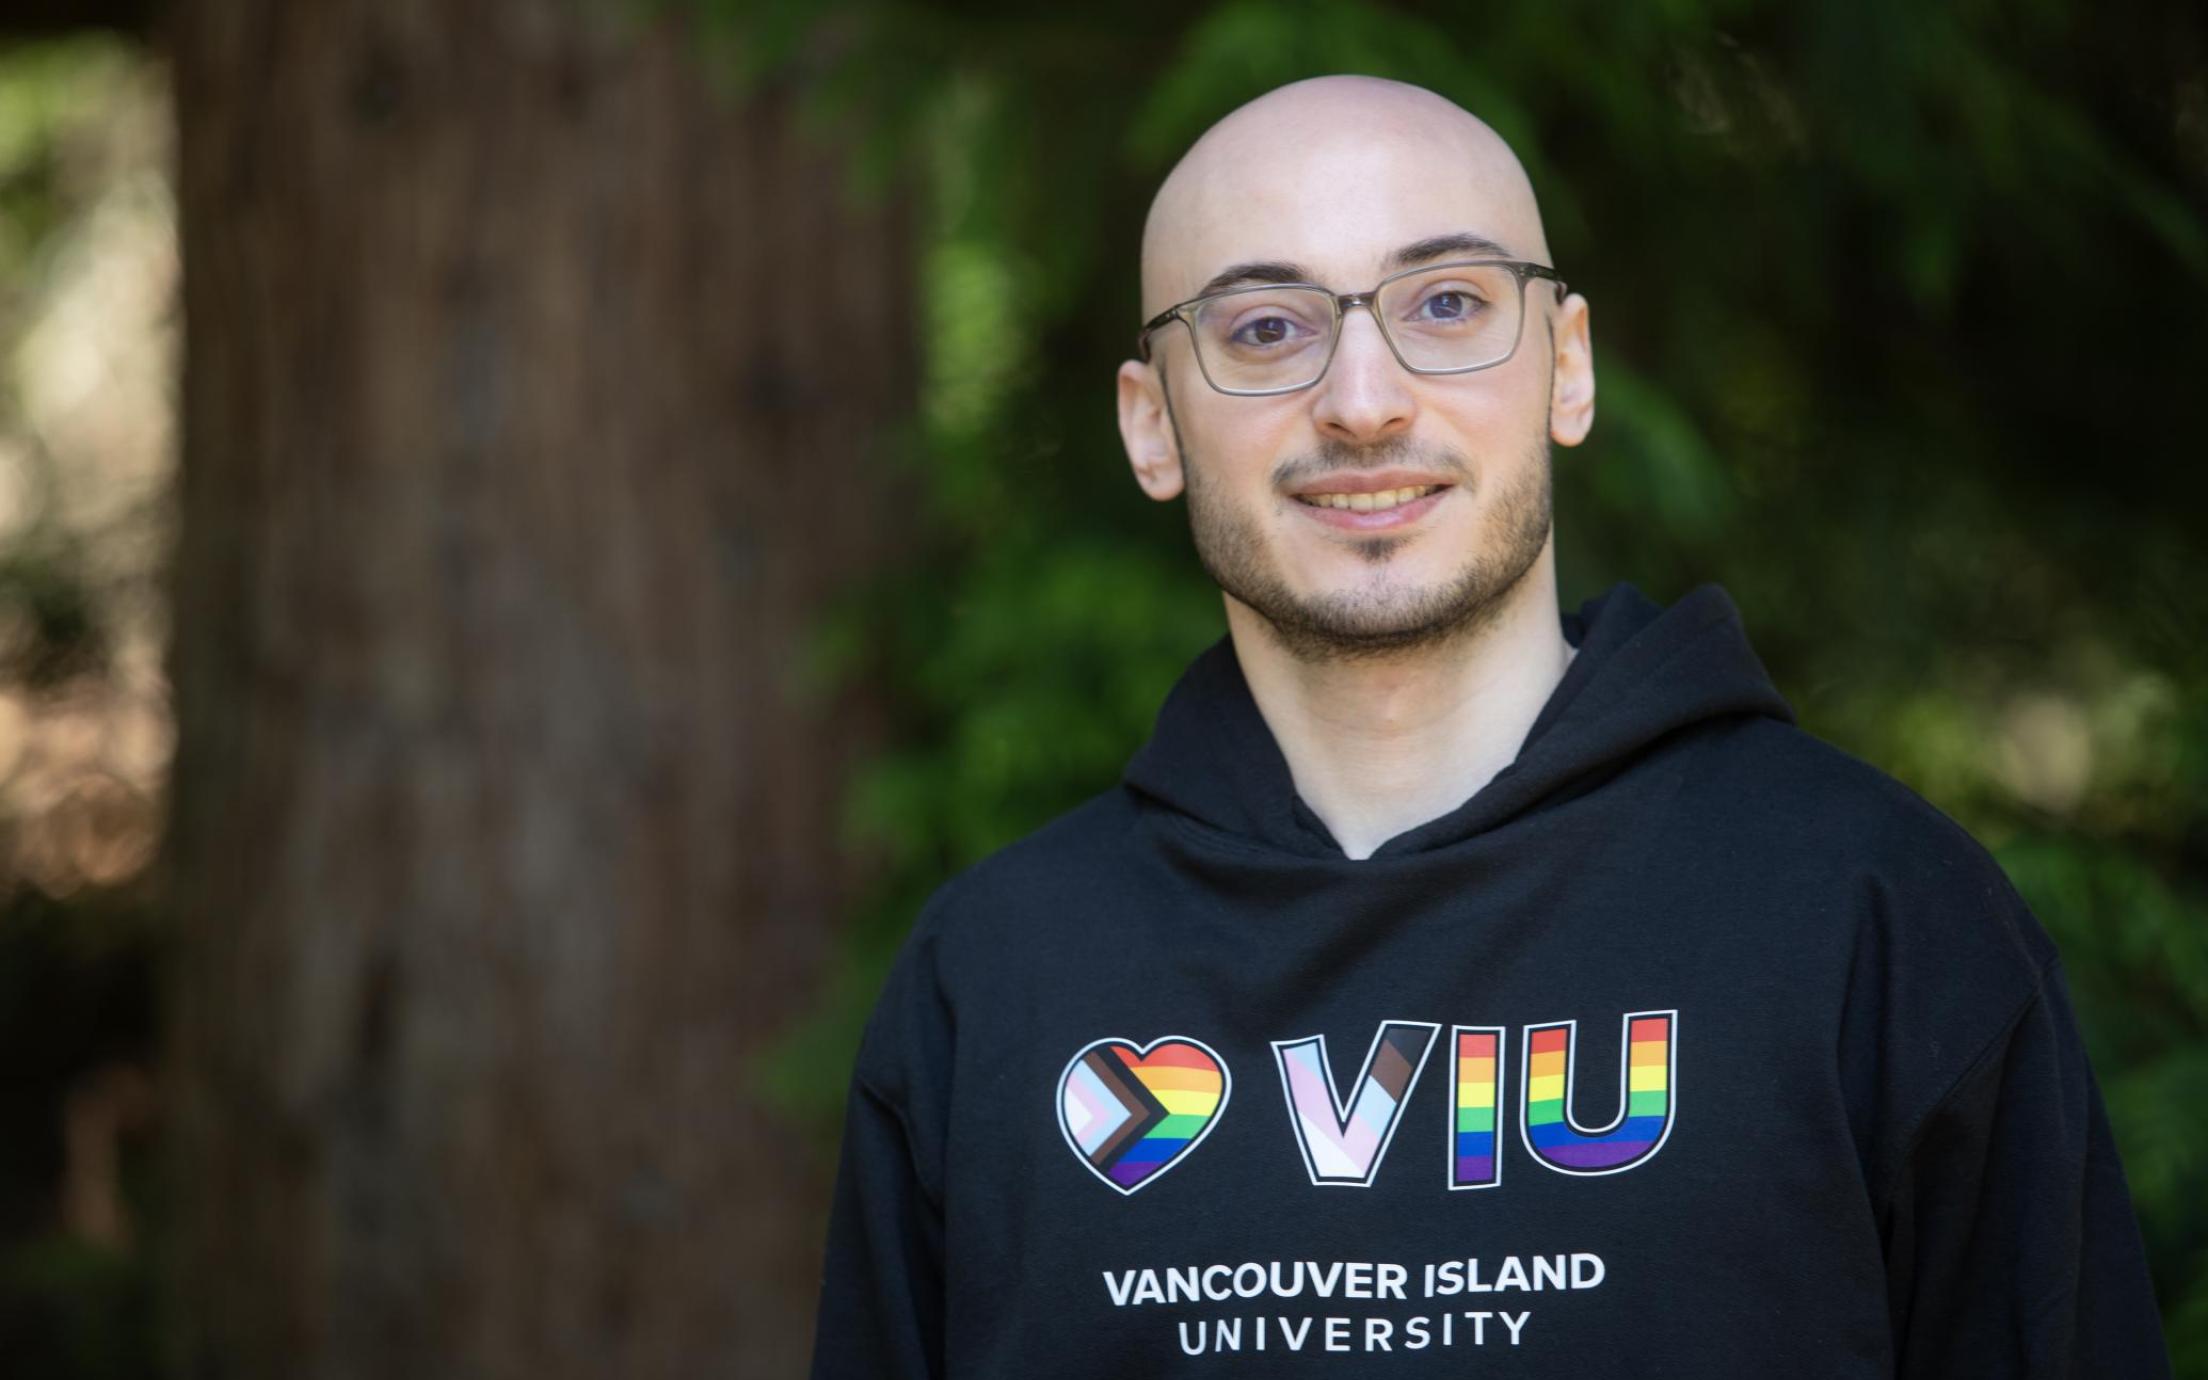 VIU grad and current employee Rayan Zeineddine wearing a VIU hoodie and glasses standing next to a tree outside and smiling at the camera